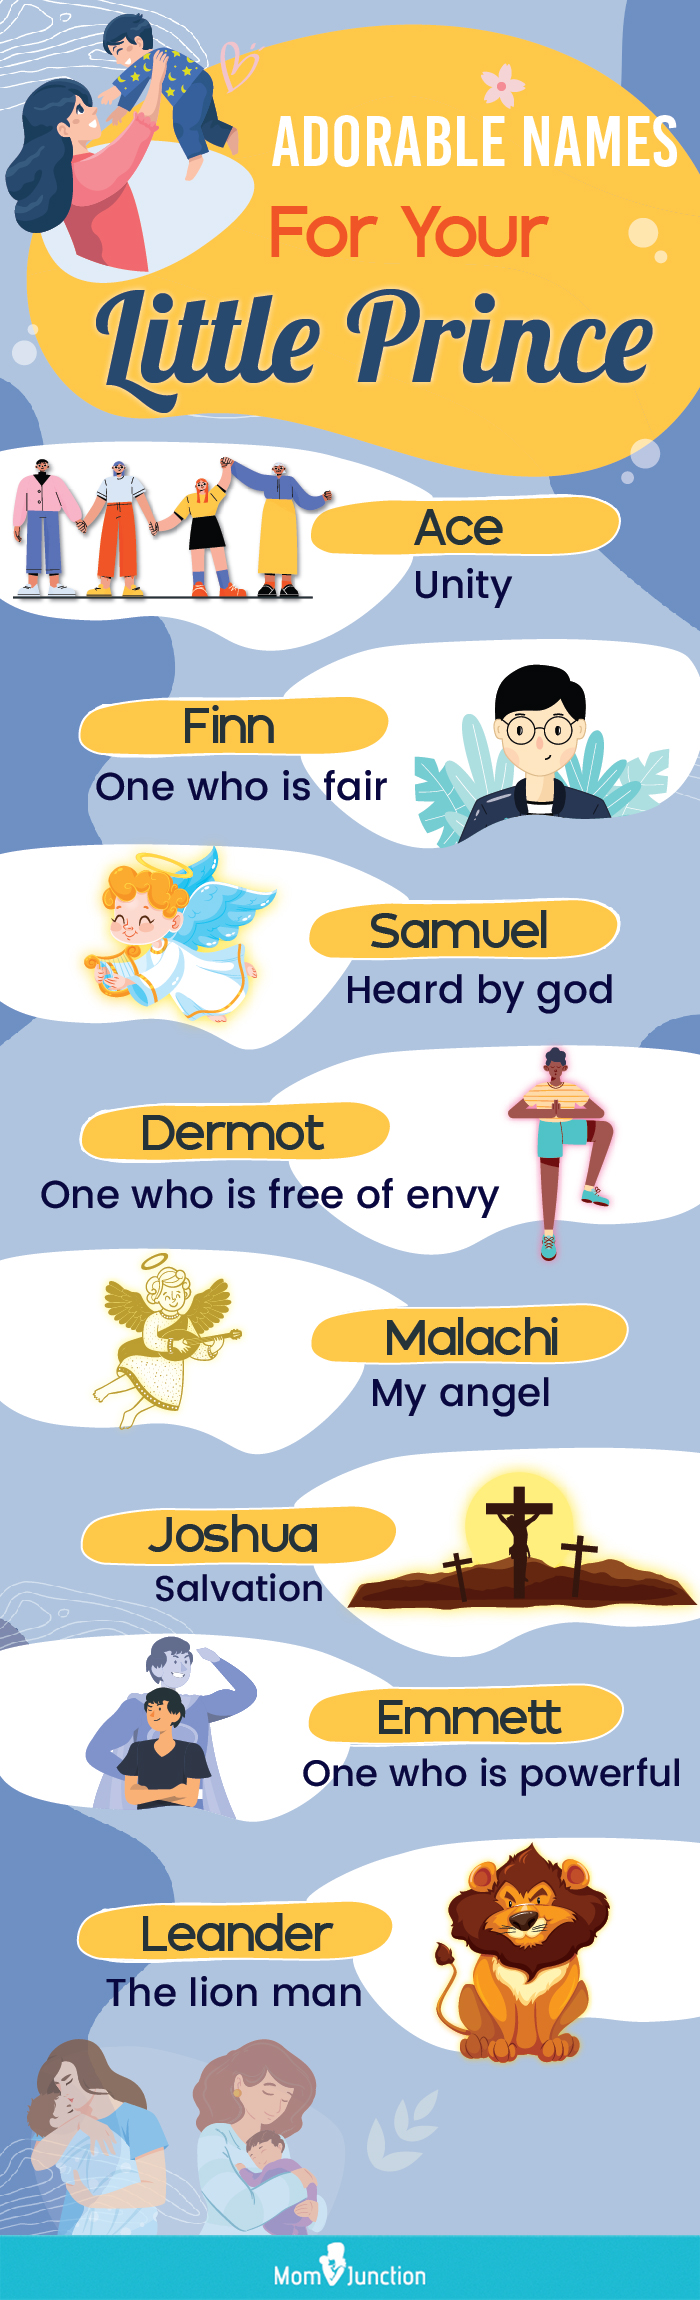 adorable names for your little prince [infographic]